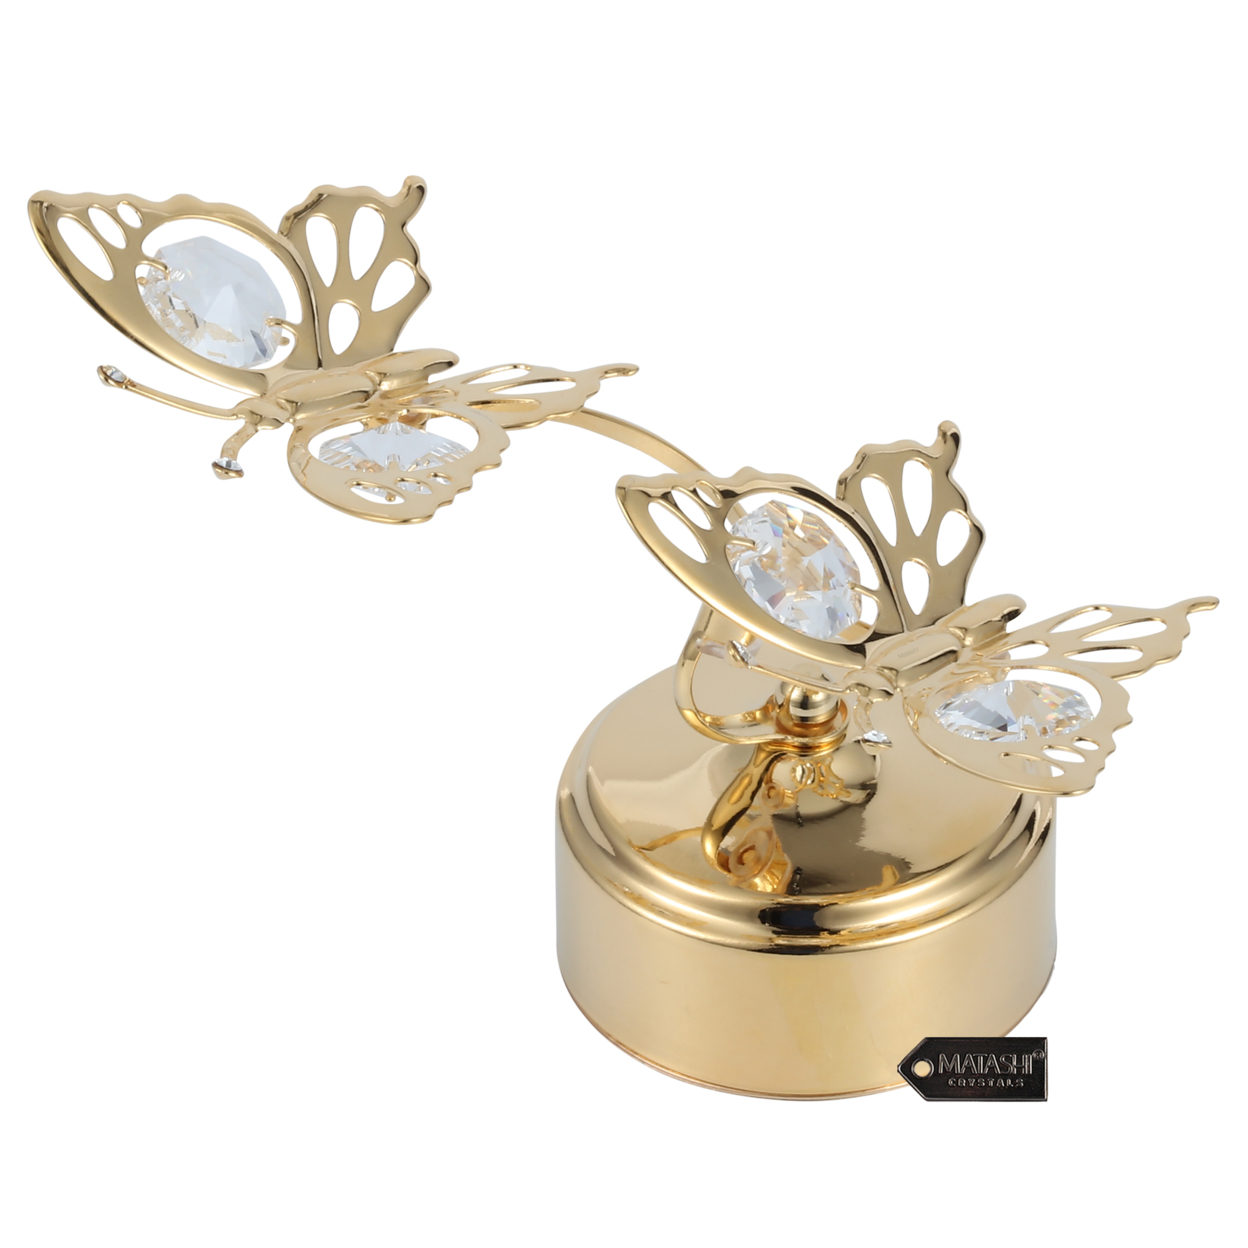 Matashi 24K Gold Plated Music Box With Crystal Studded Double Butterfly Figurine